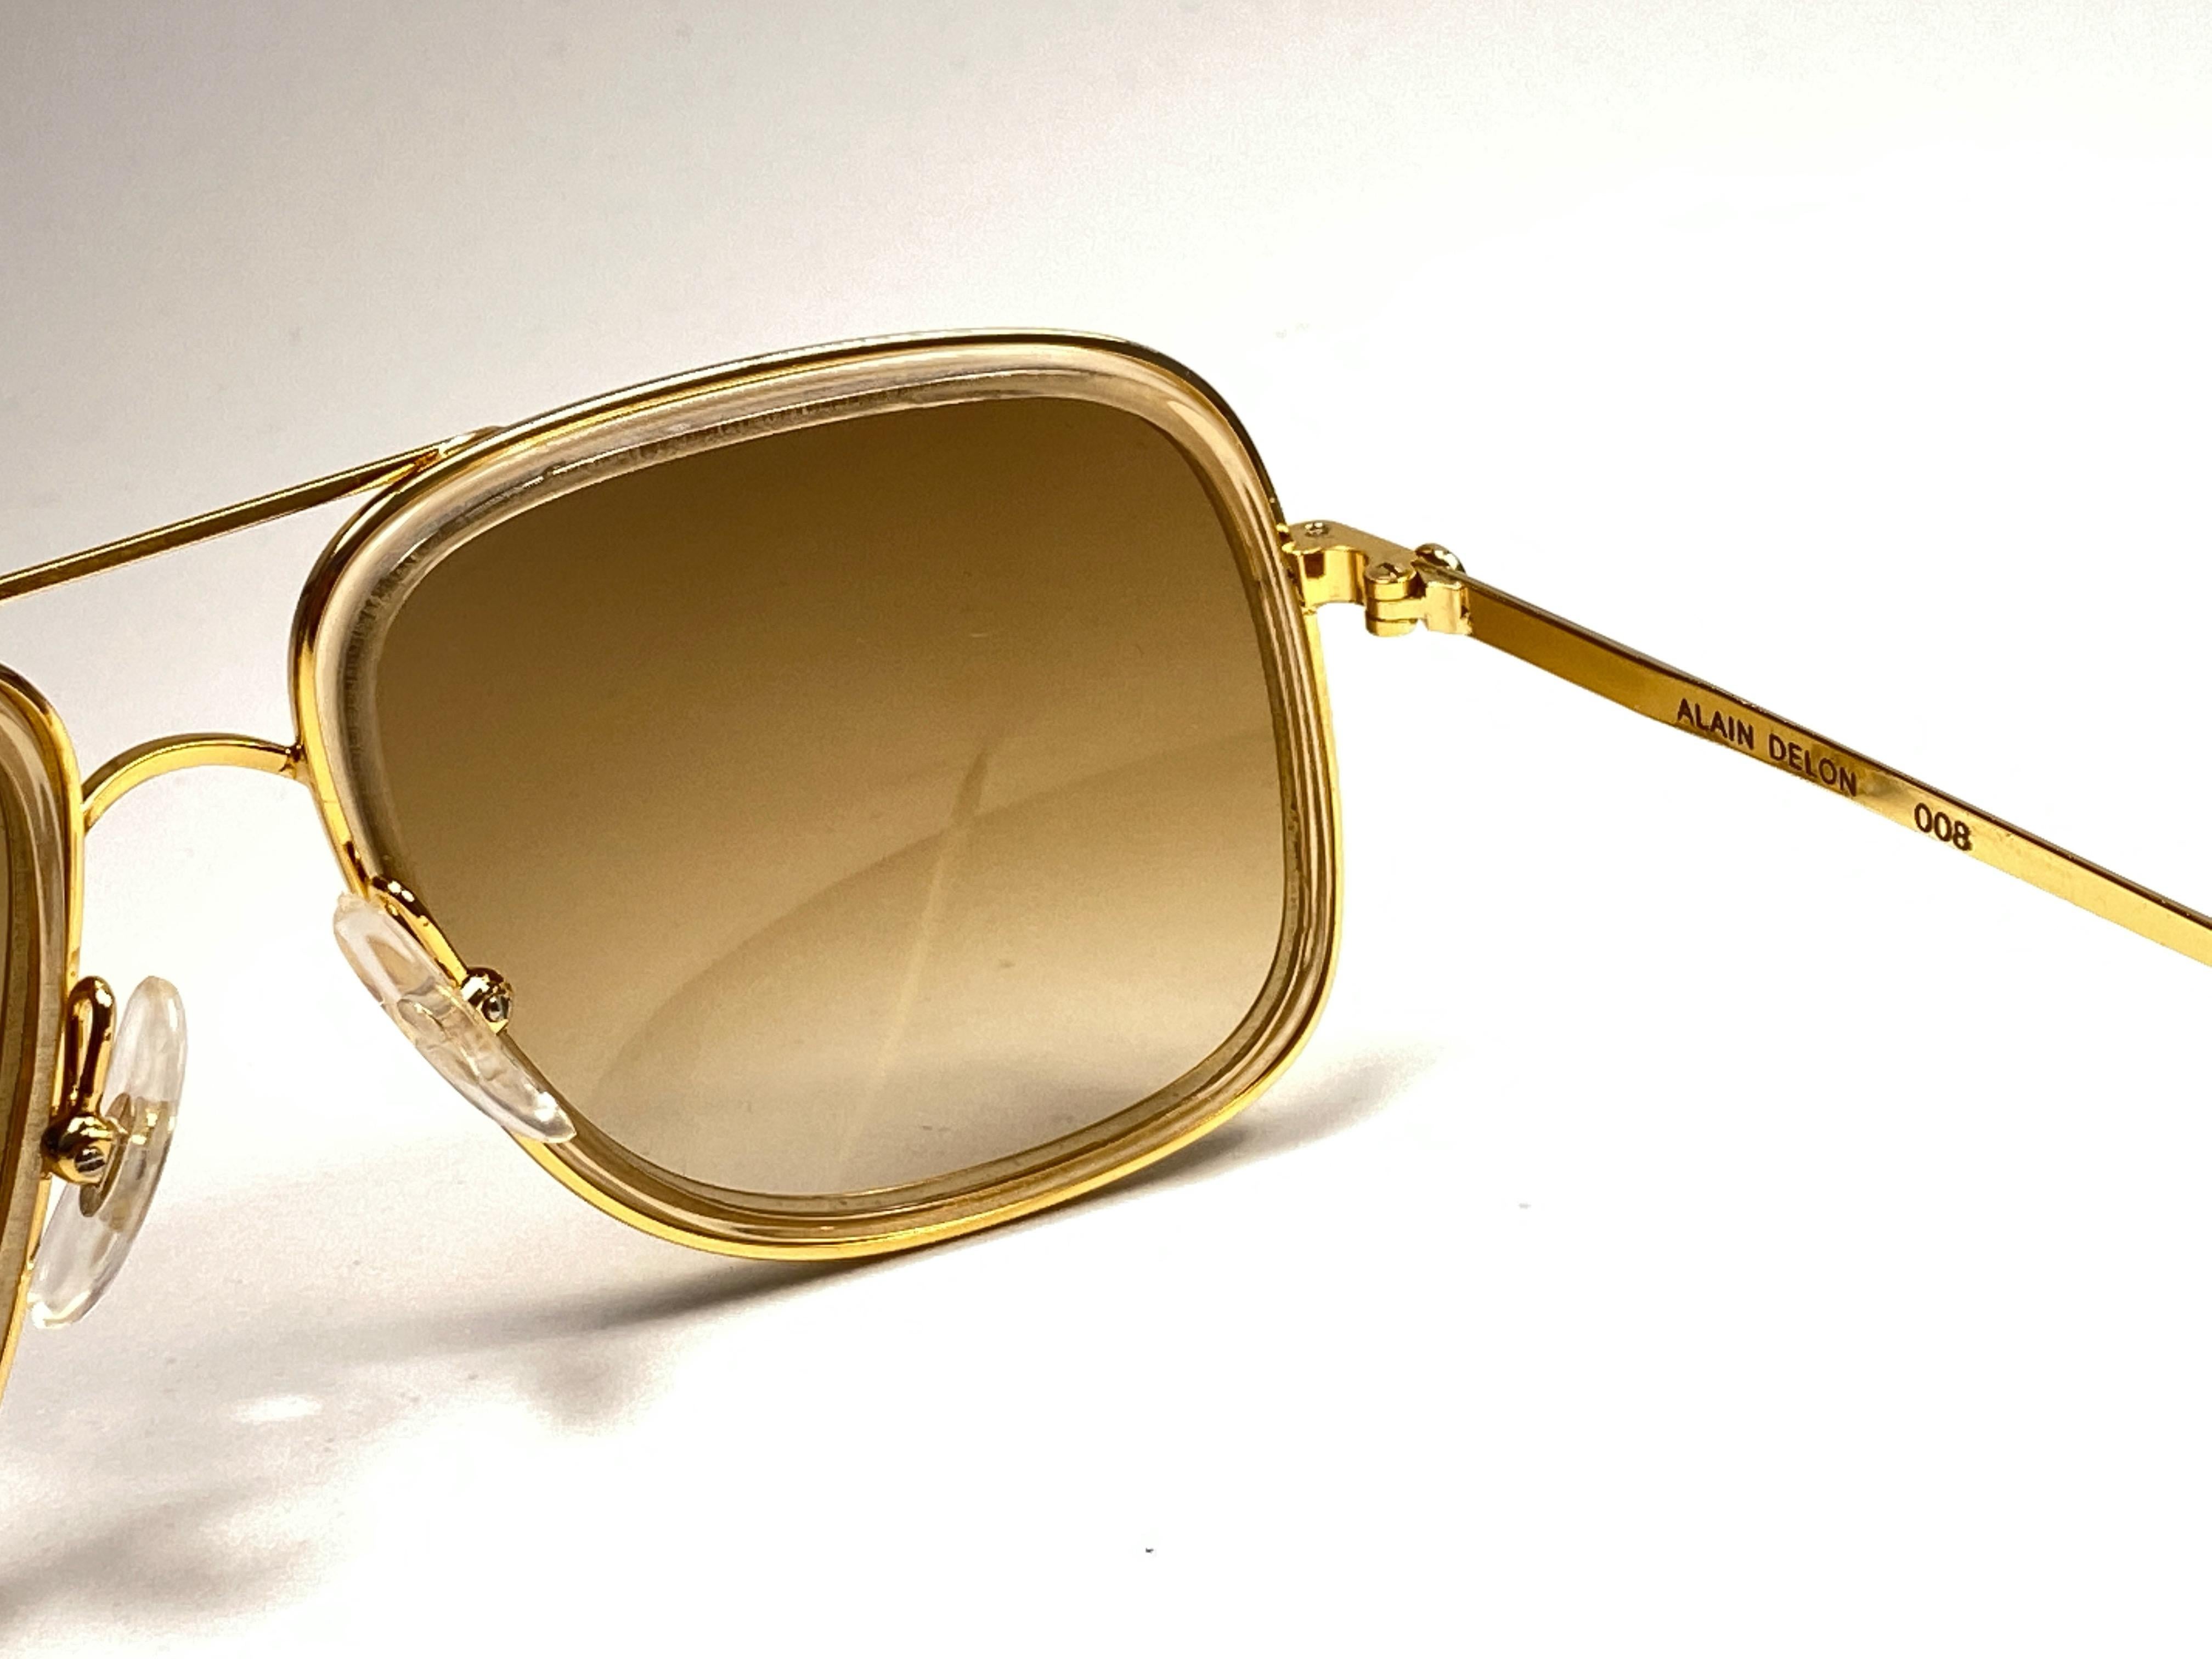 New vintage Alain Delon sunglasses.

Oversized gold with translucent details frame holding a pair of spotless brown gradient lenses.   

New, never worn or displayed. 

 Made in Italy.

MEASUREMENTS 



FRONT : 14 CMS

LENS HEIGHT : 4.5 CMS

LENS